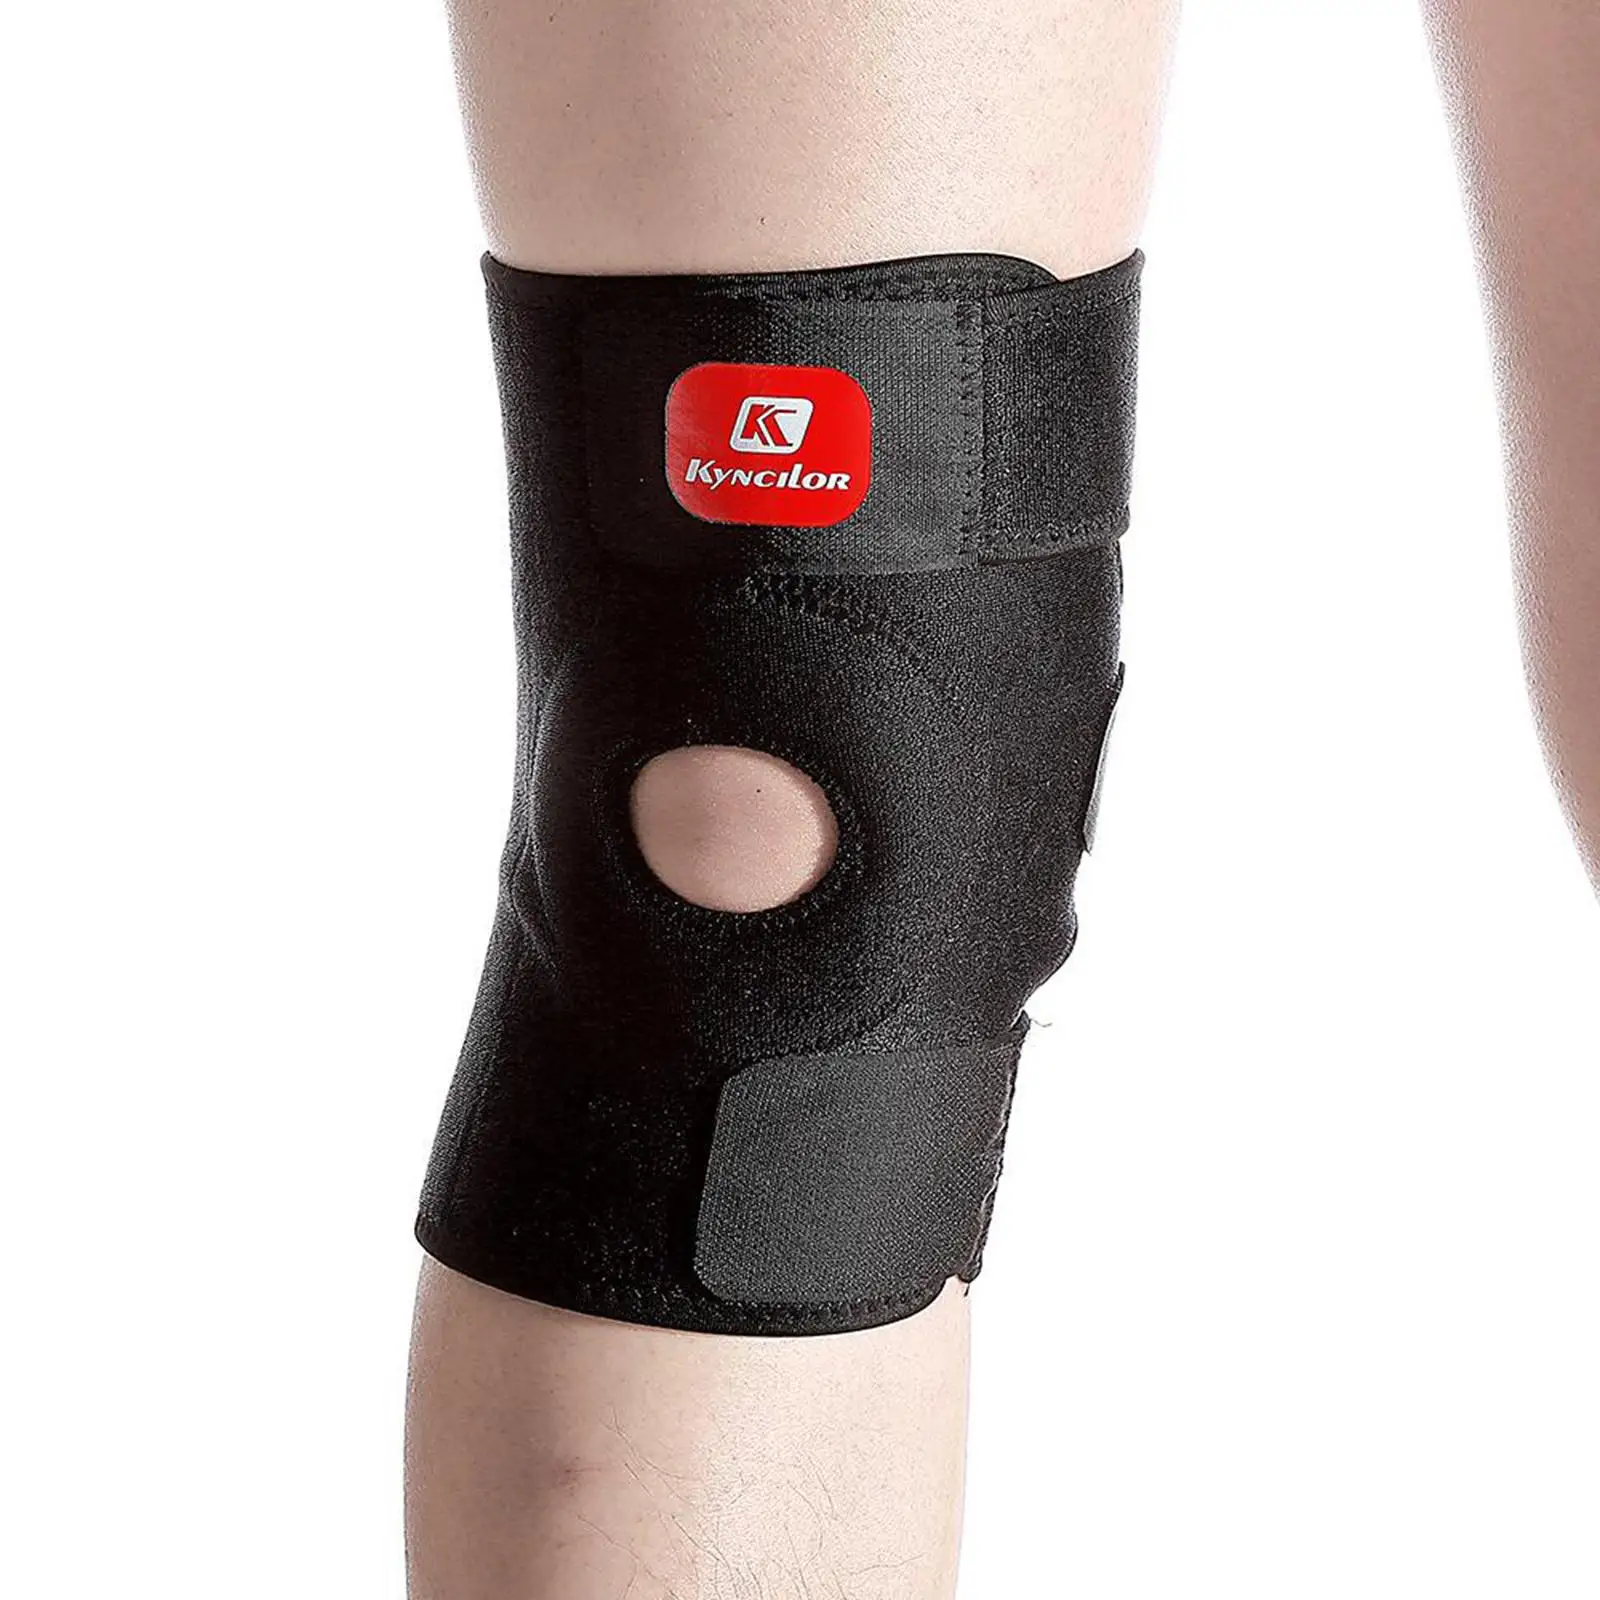 Adjustable Compression Knee Support    Pain, Injury , Running, Workout